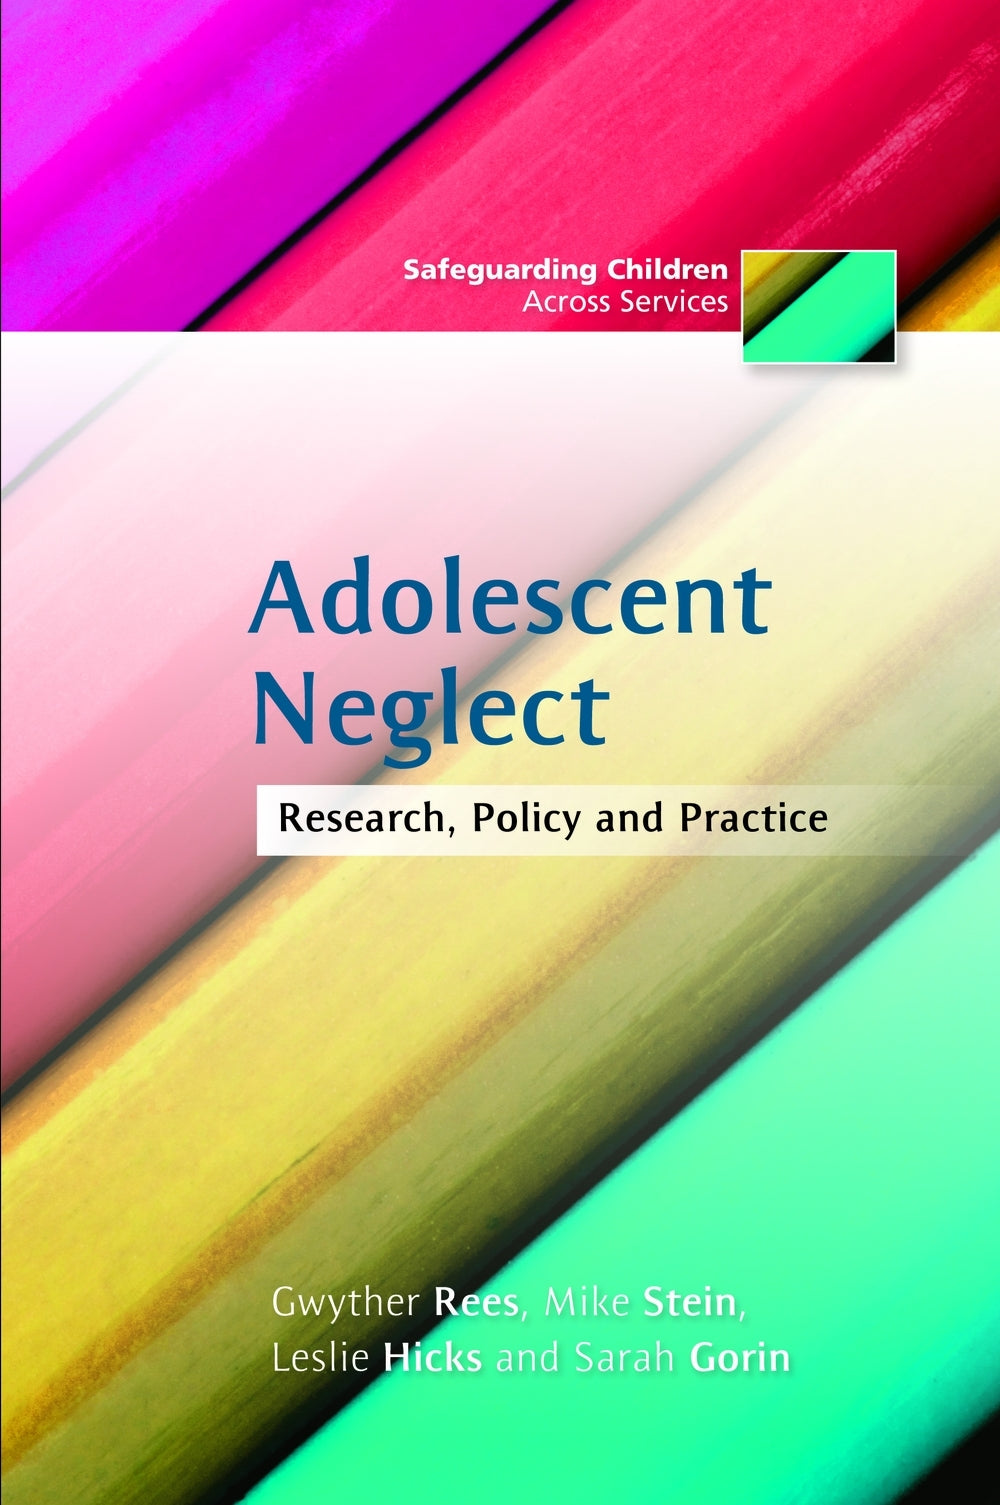 Adolescent Neglect by Sarah Gorin, Mike Stein, Leslie Hicks, Gwyther Rees